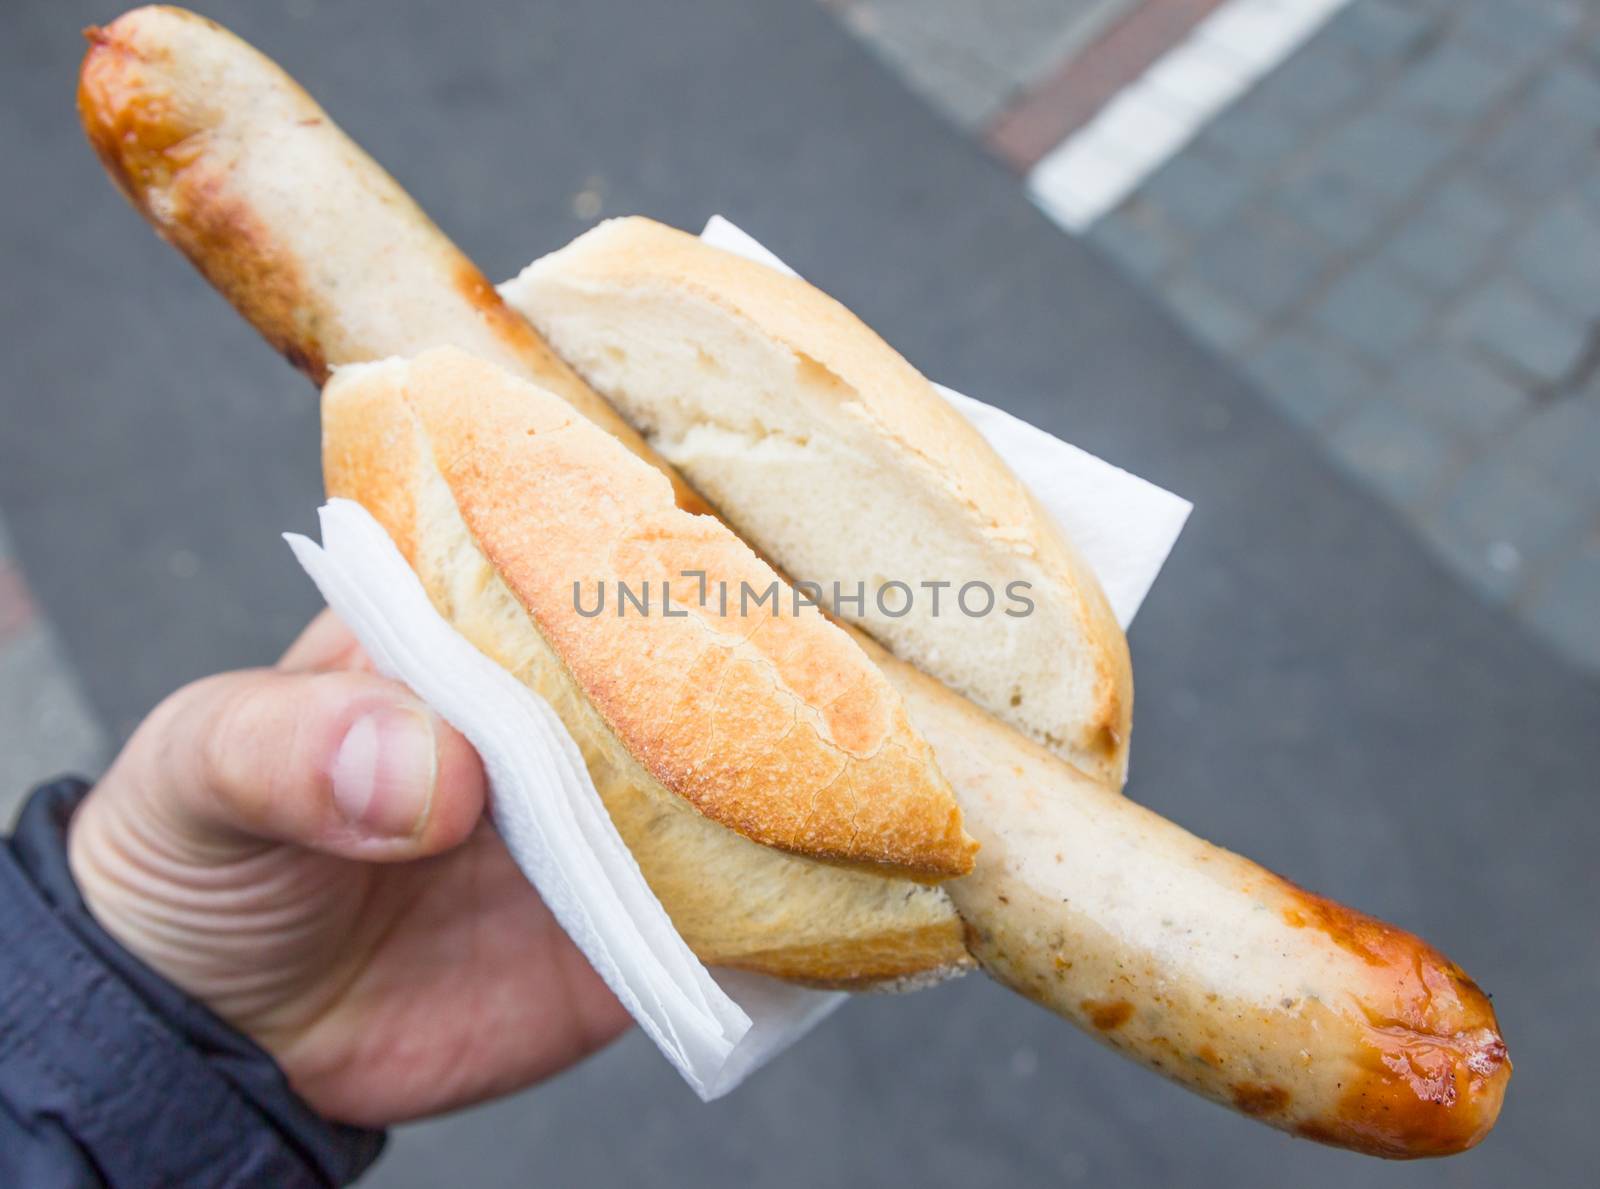 Hot dog with a big sausage by gianliguori